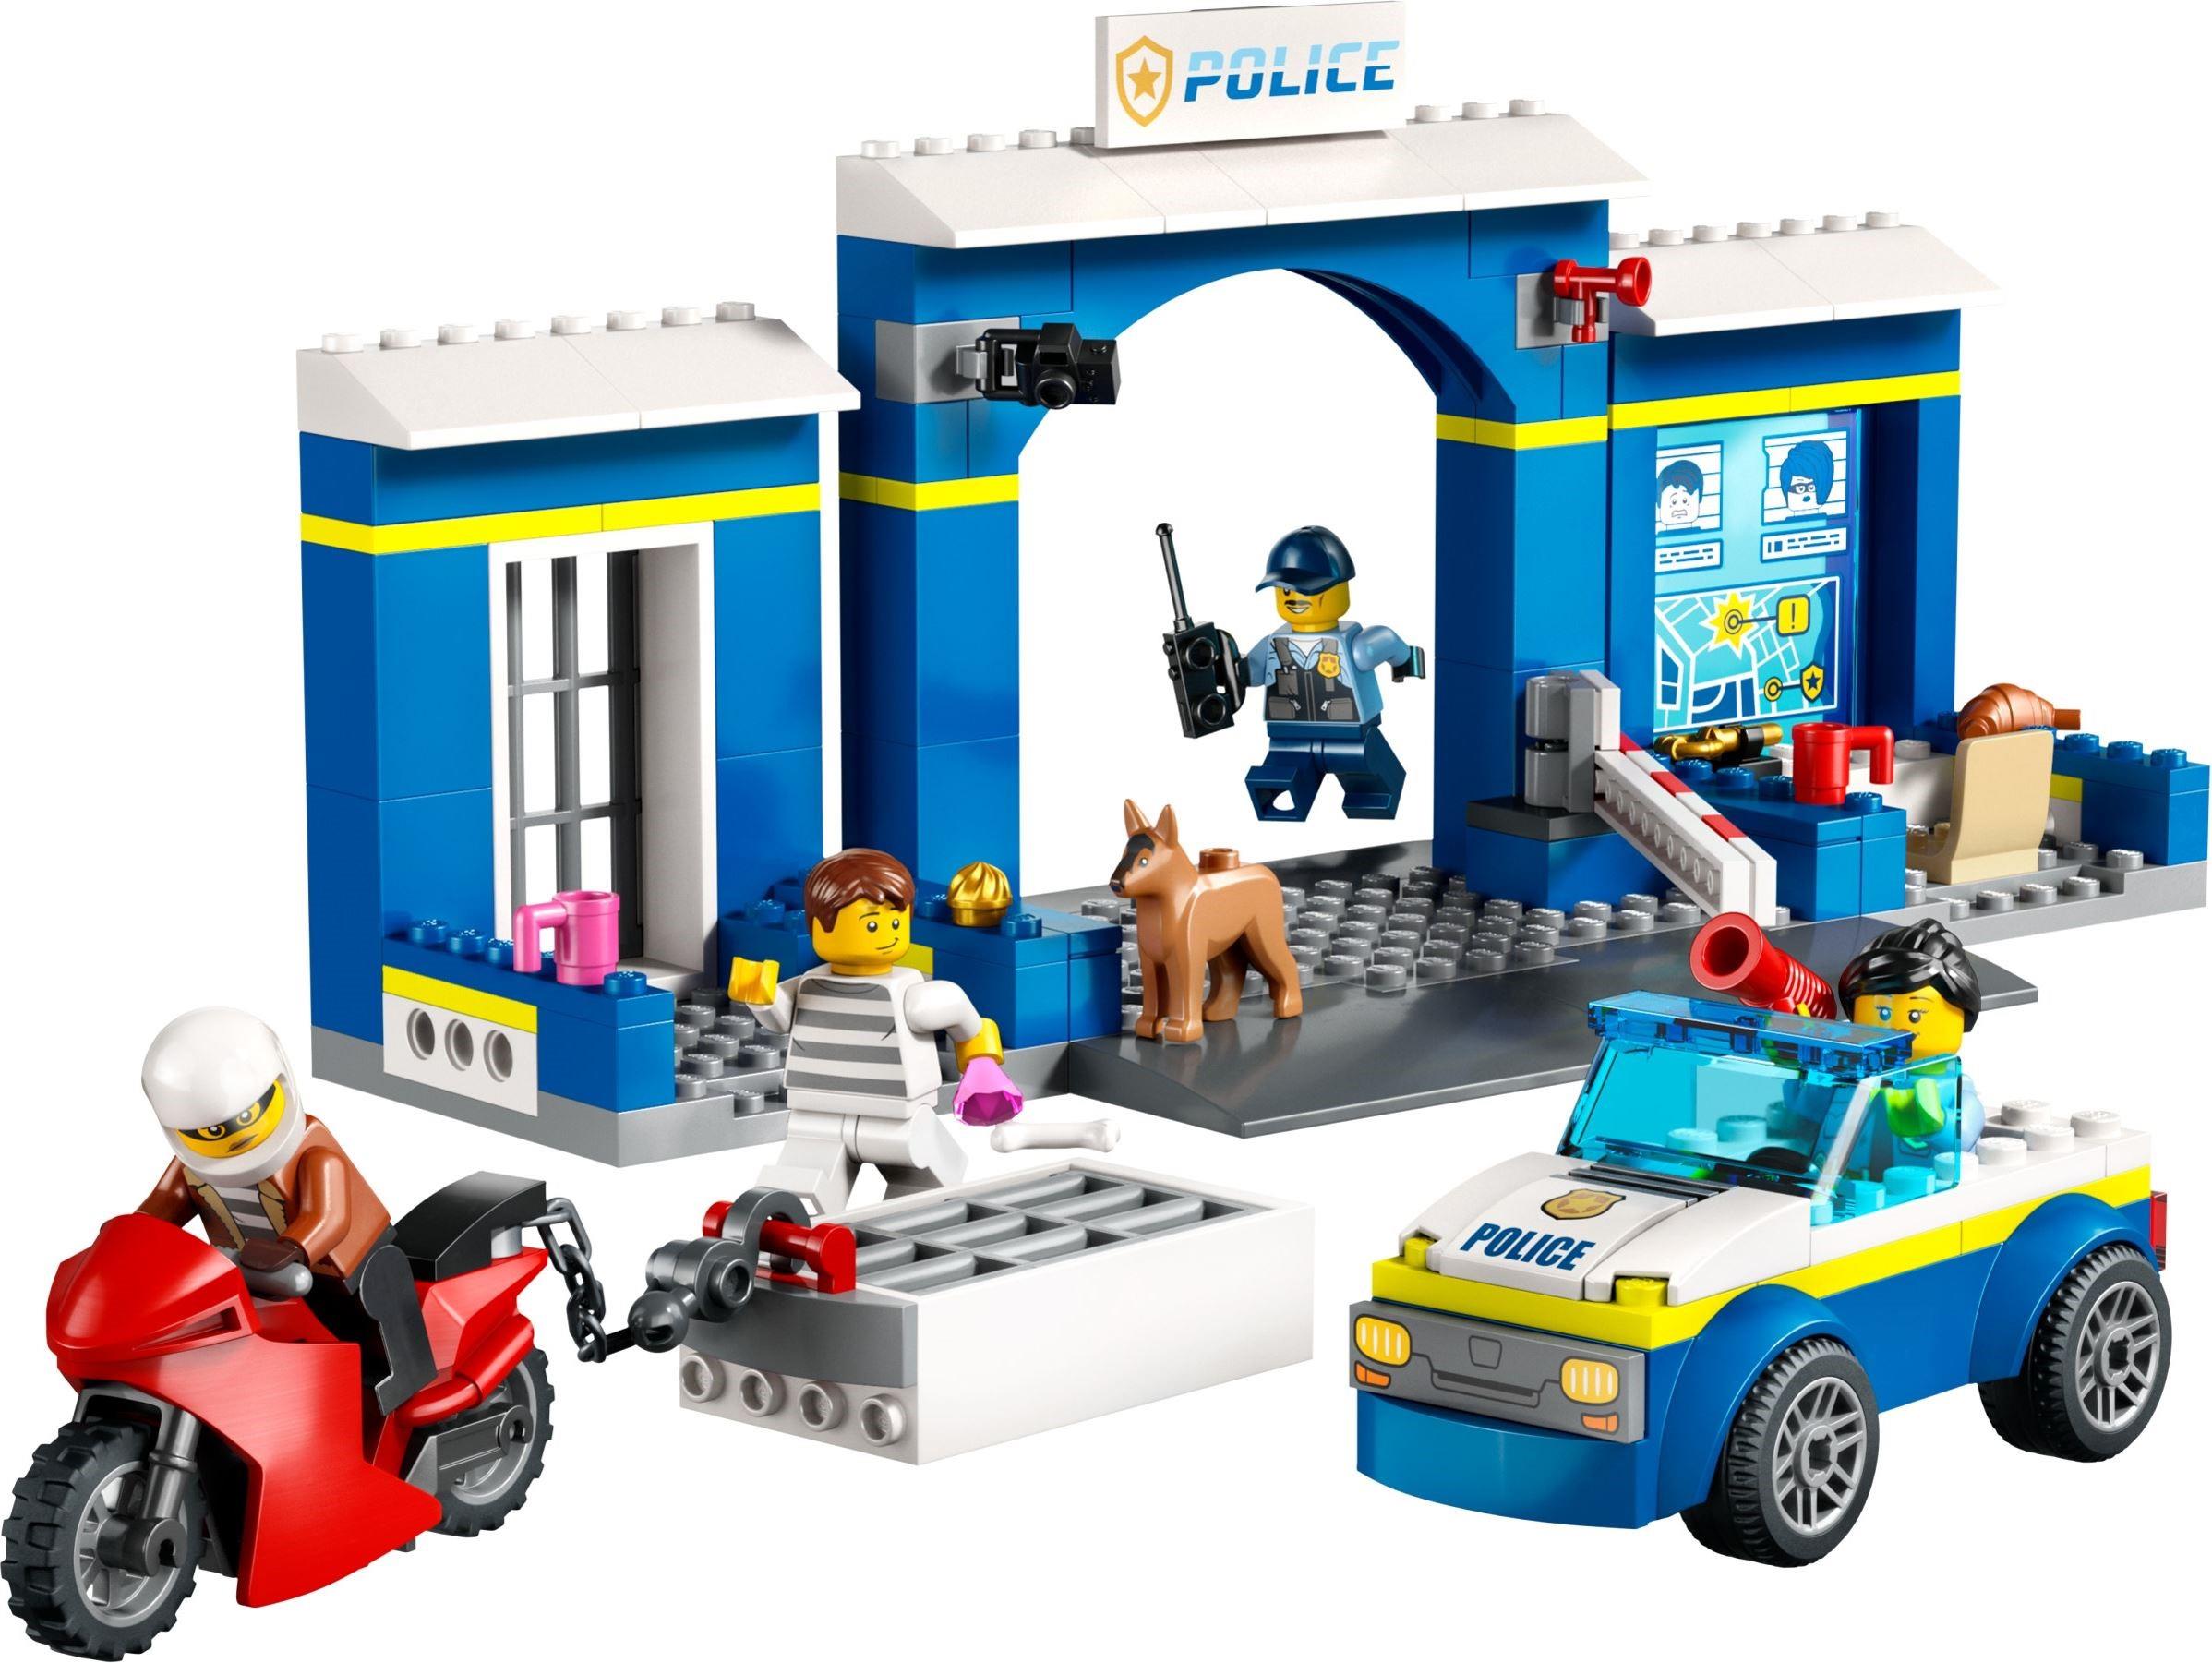 LEGO 7237 City Police station, Retired New in Damaged Box